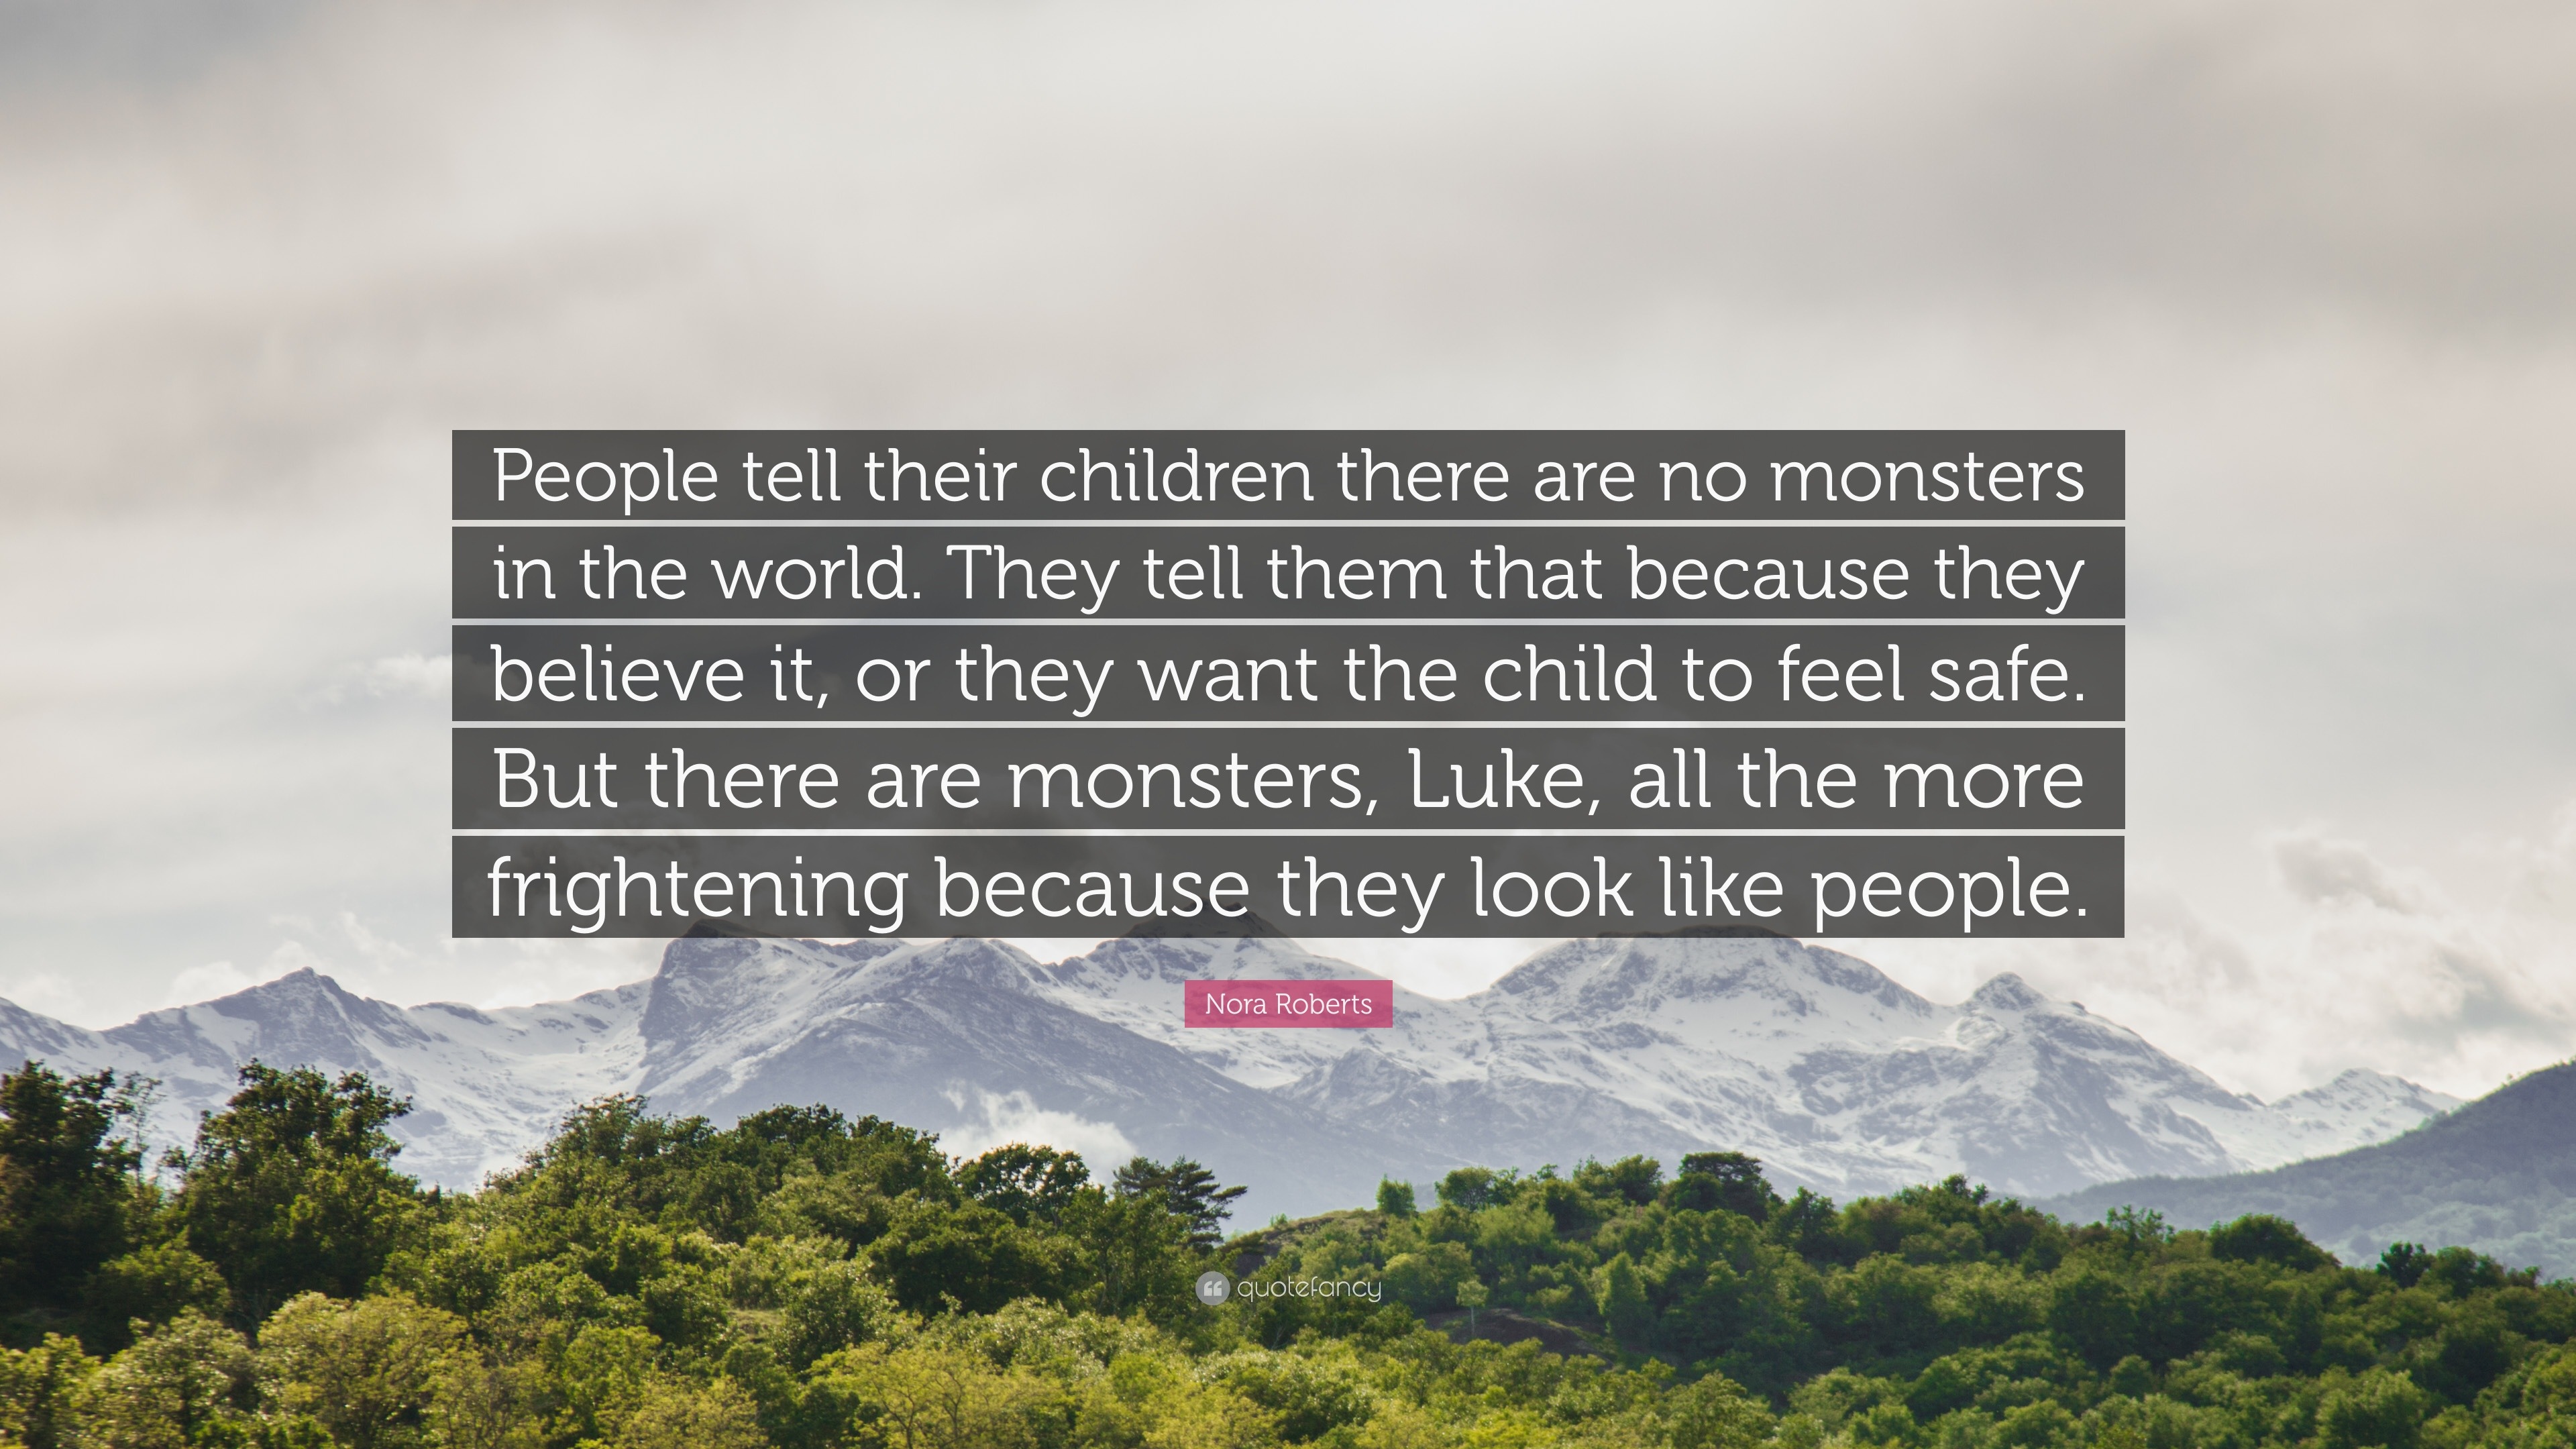 From: What Are The Monsters & What Do They Want?